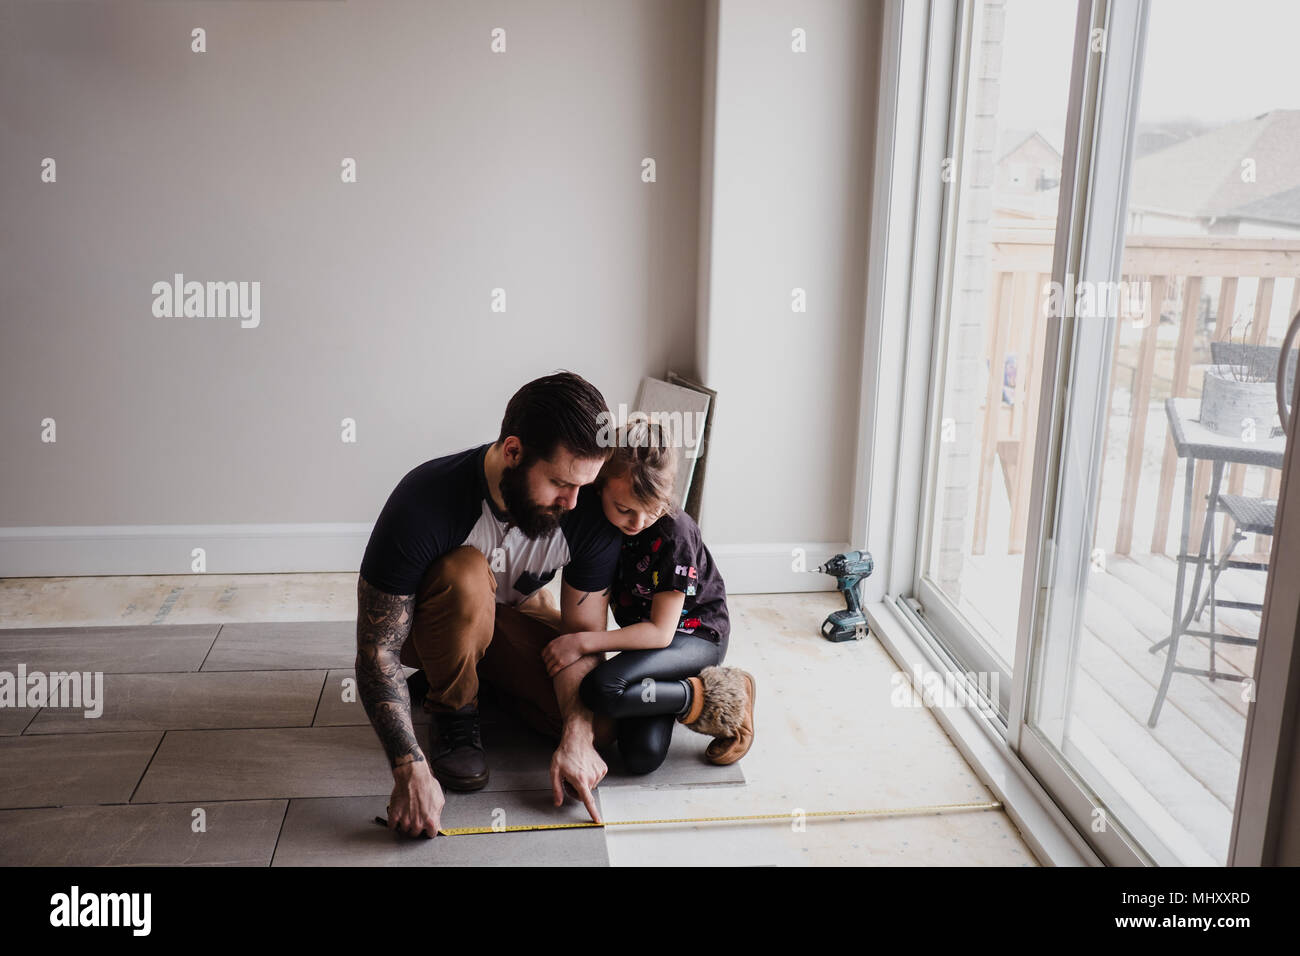 Girl helping father install floor tiles Stock Photo